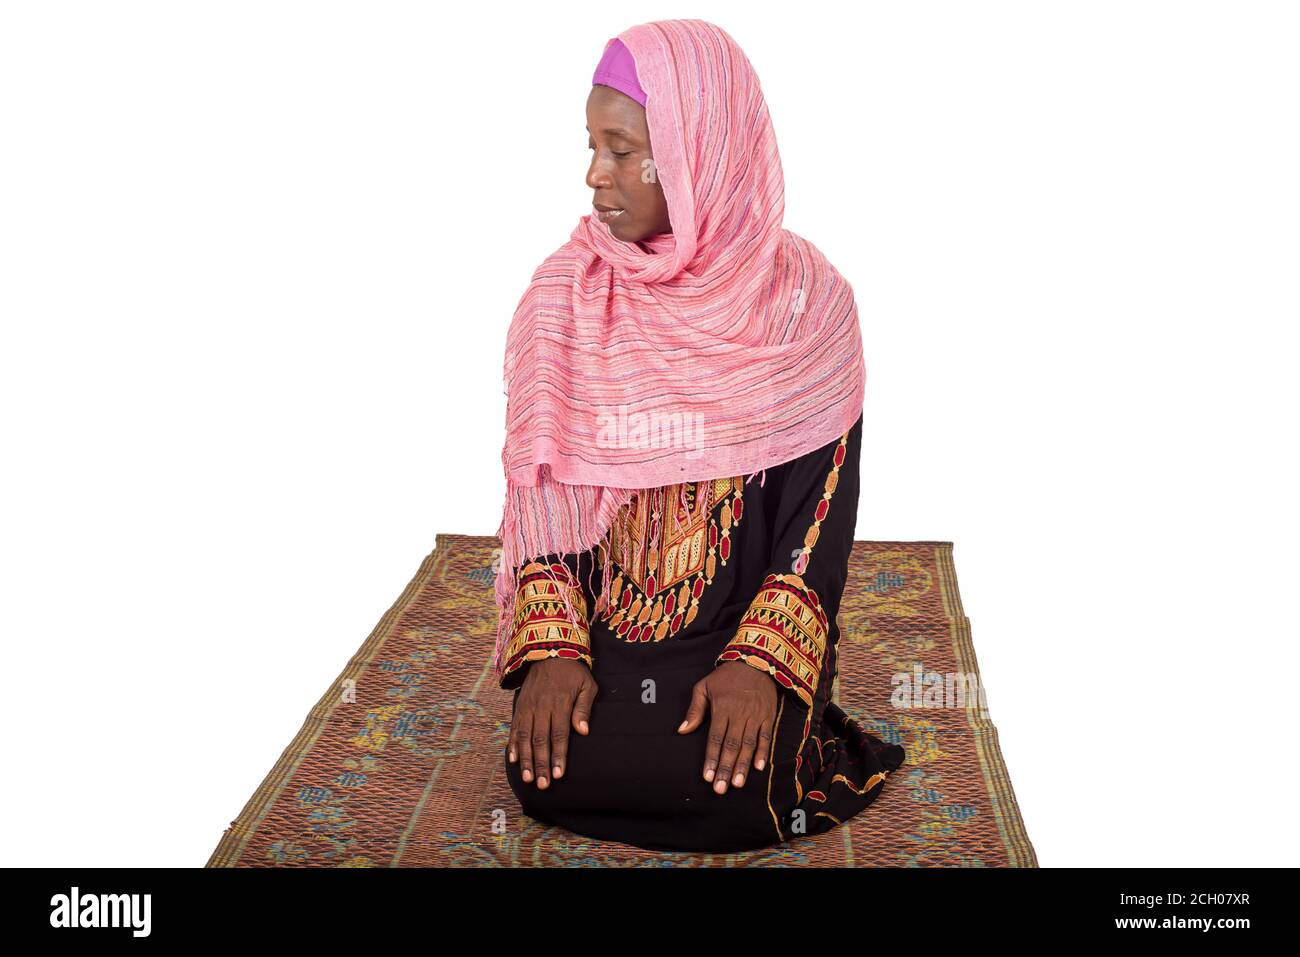 young woman on her knees on a veiled head mat and praying. Stock Photo